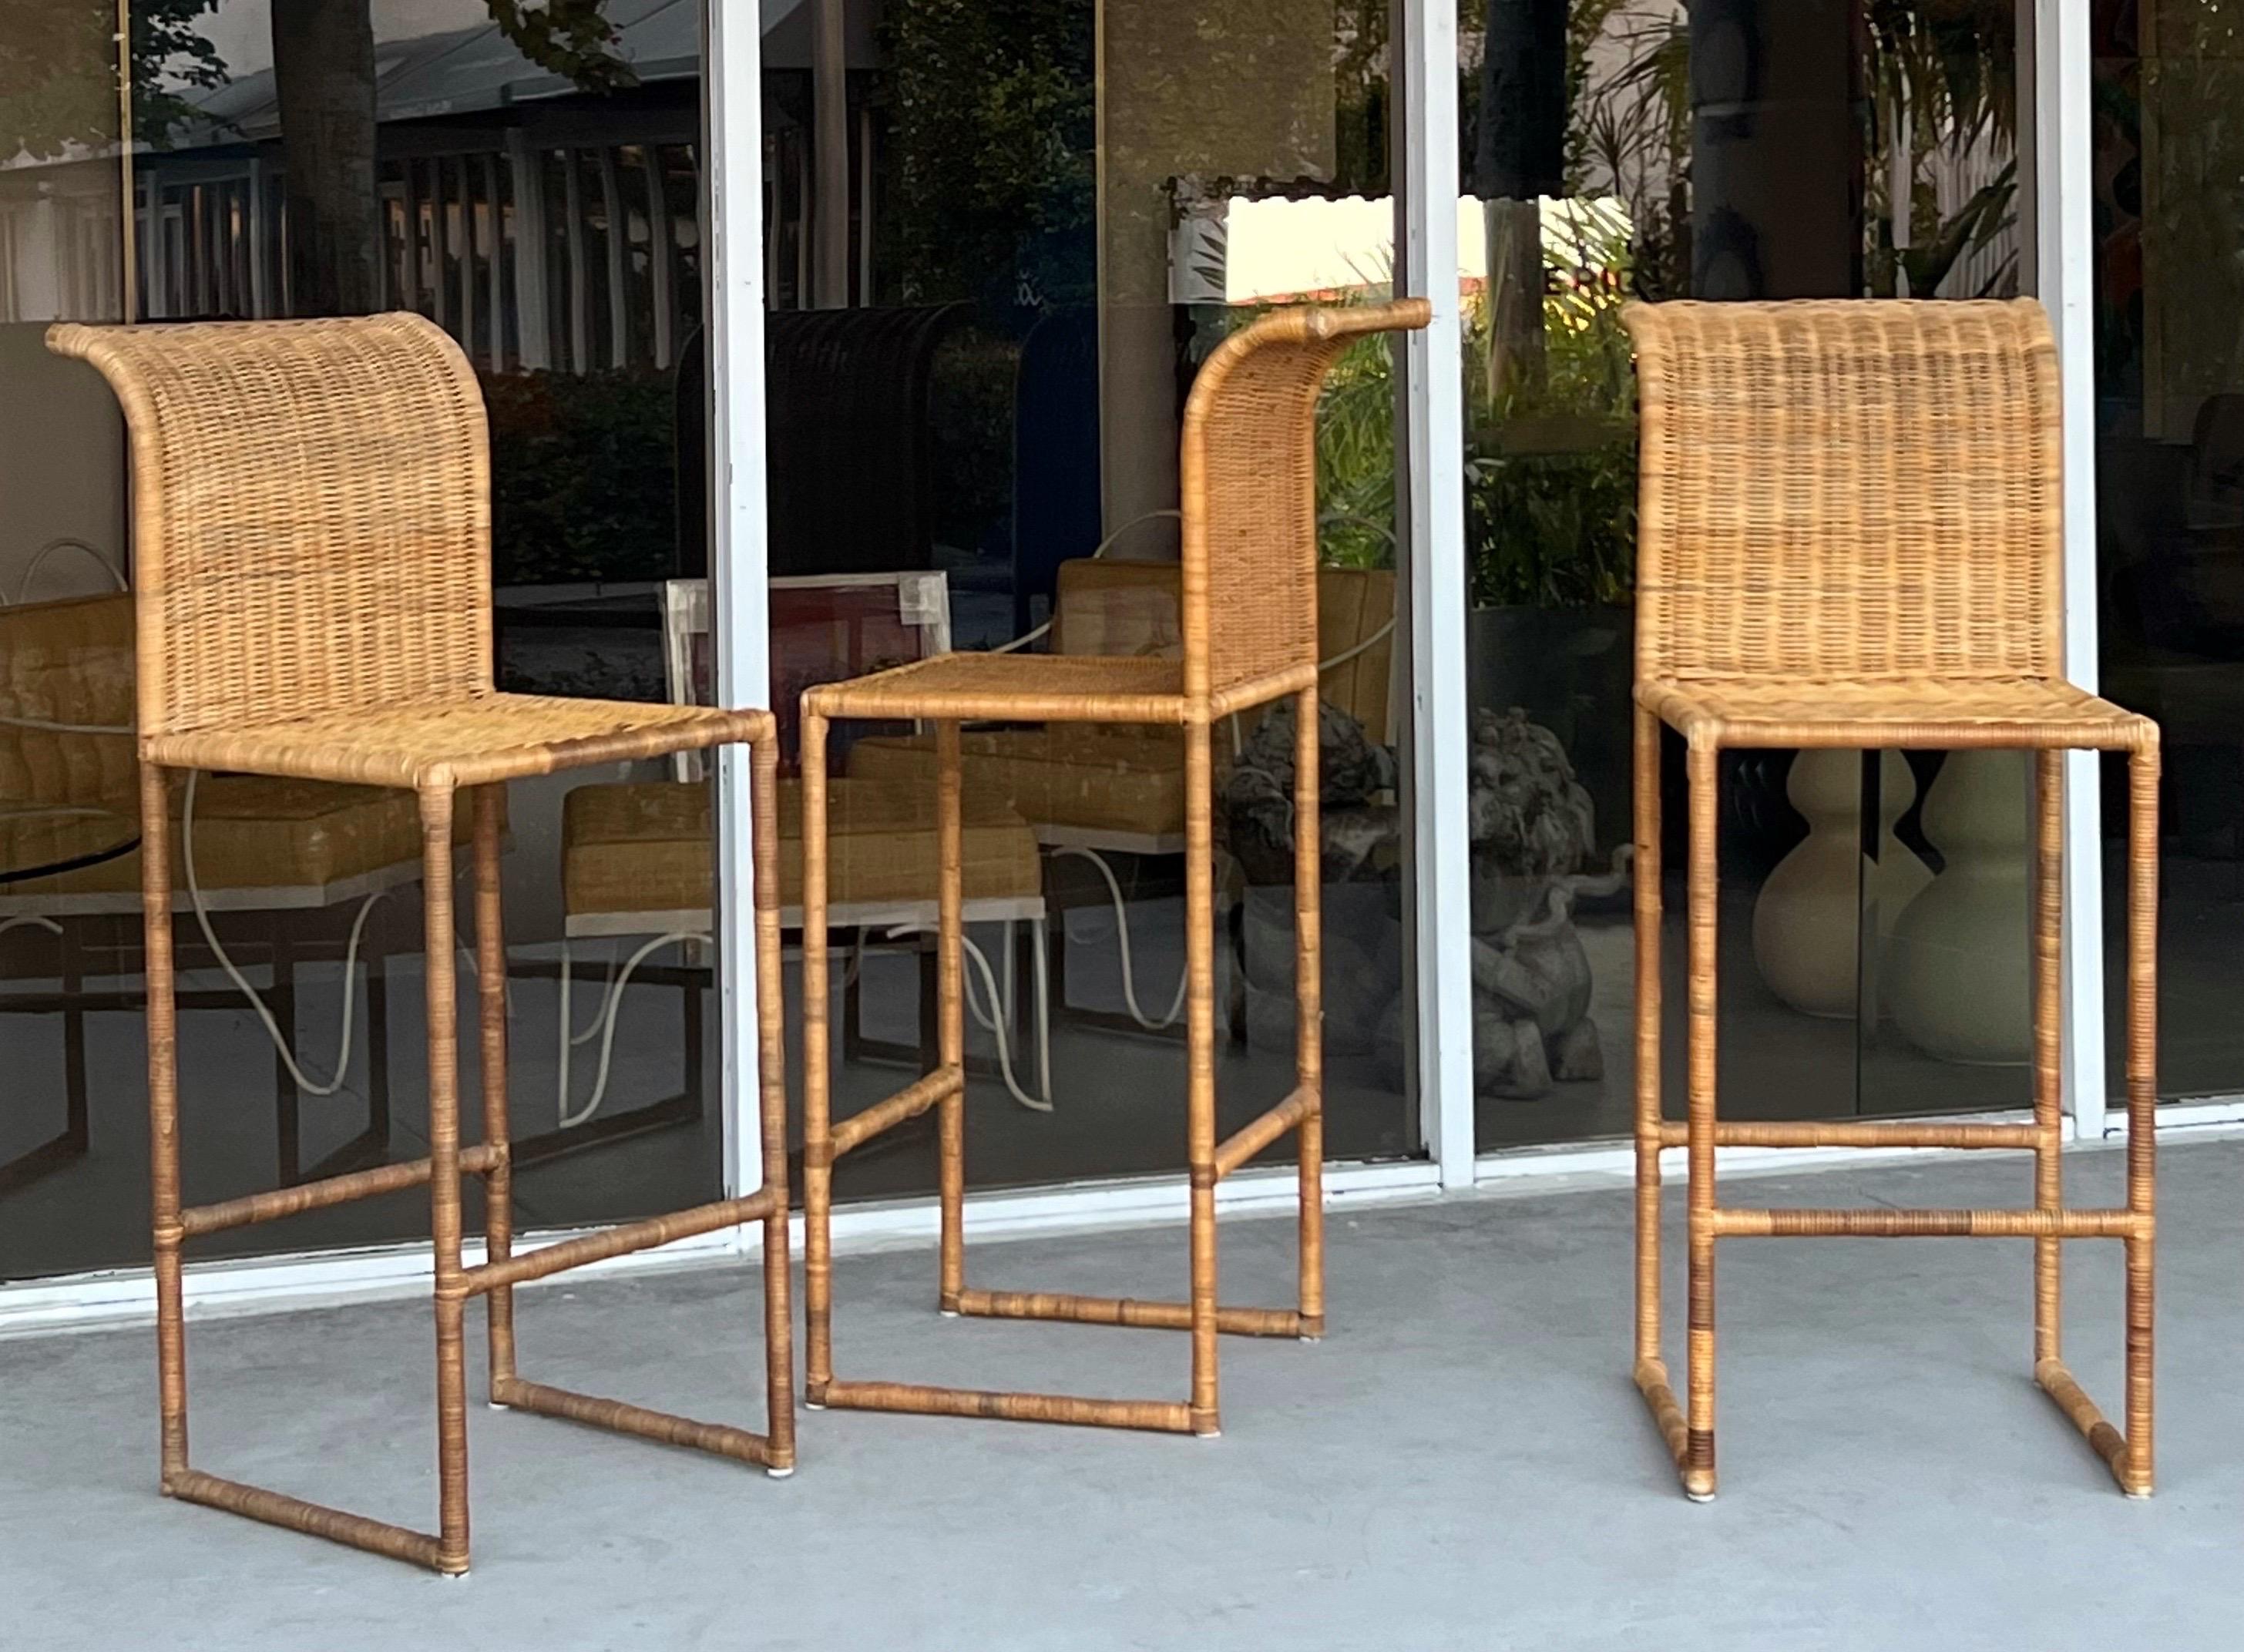 A set of 3 wicker barstools. Clean modern design. 